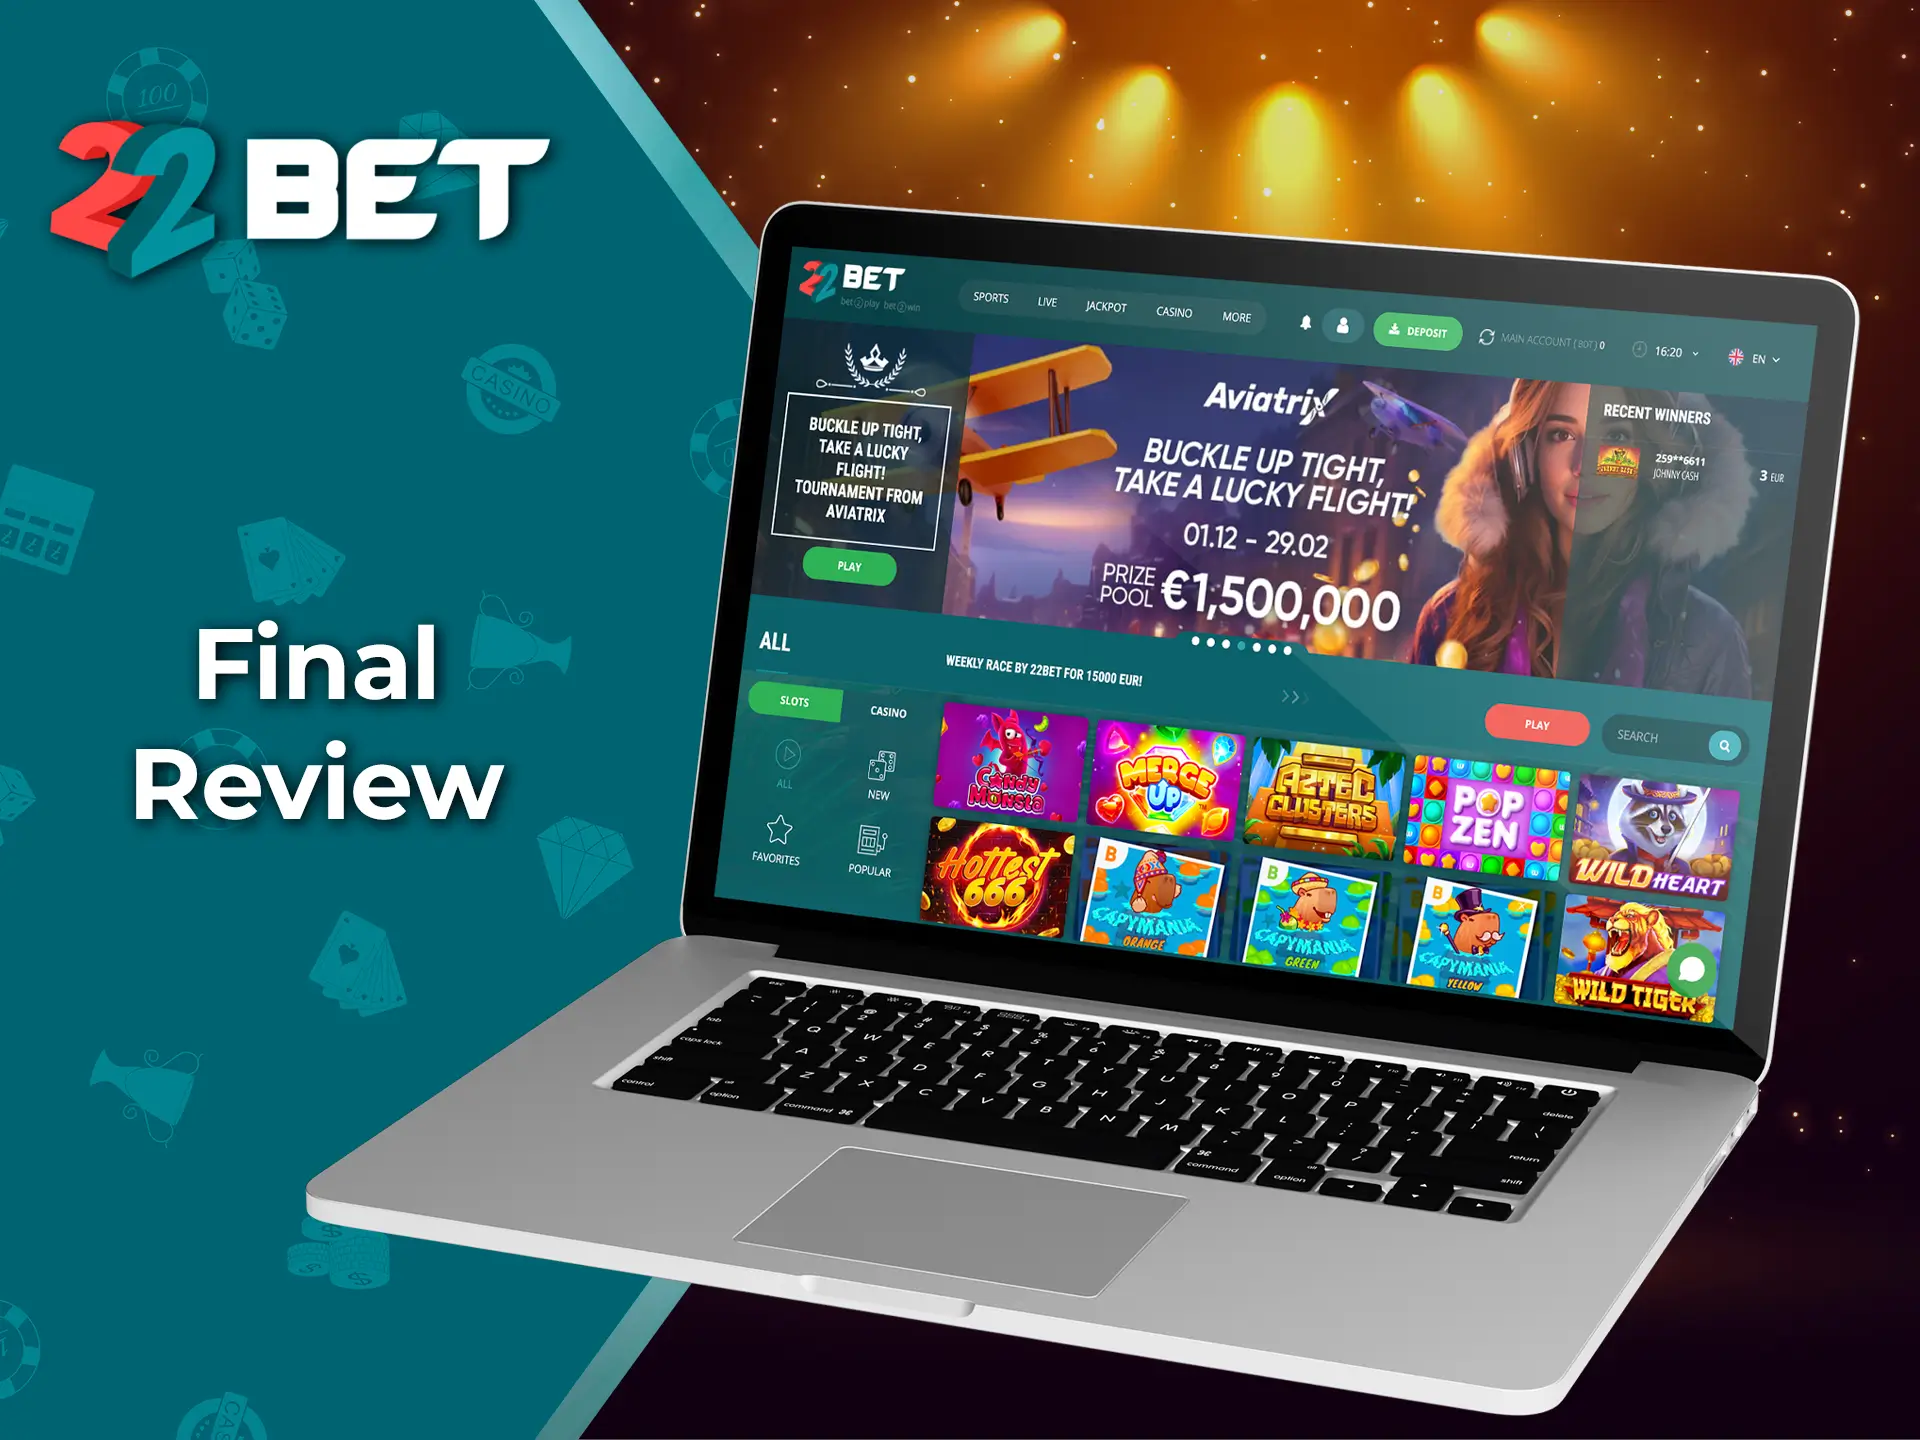 Use the popular 22Bet casino in Bangladesh and enjoy high quality and service.